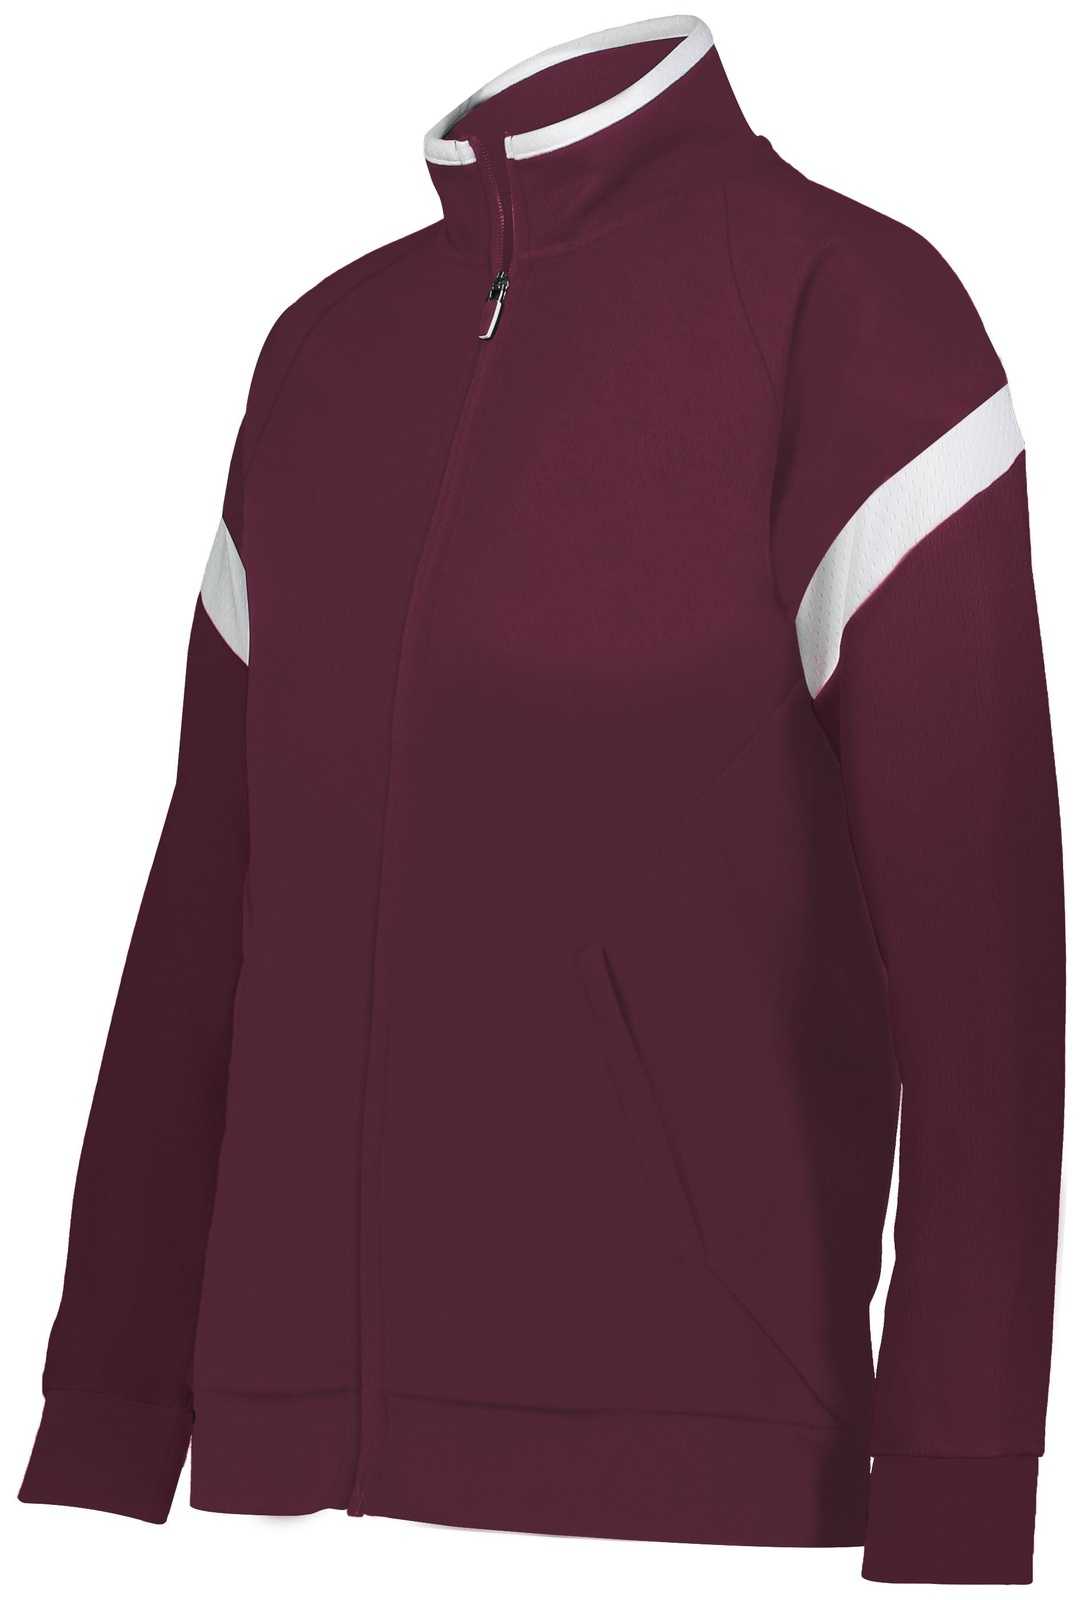 Holloway 229779 Ladies Limitless Jacket - Maroon White - HIT a Double